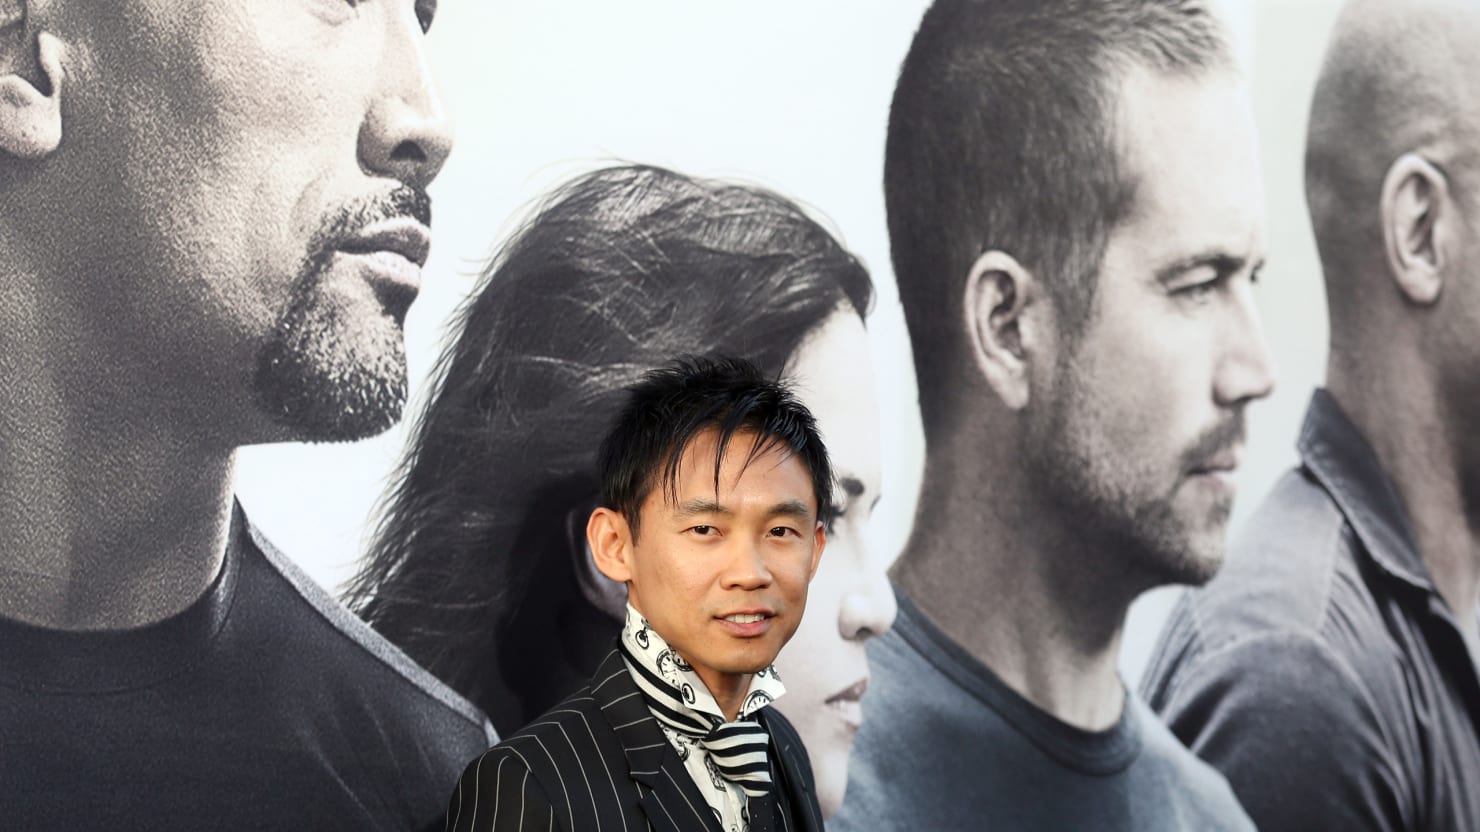 Director James Wan's Return to Horror After 'Furious 7'